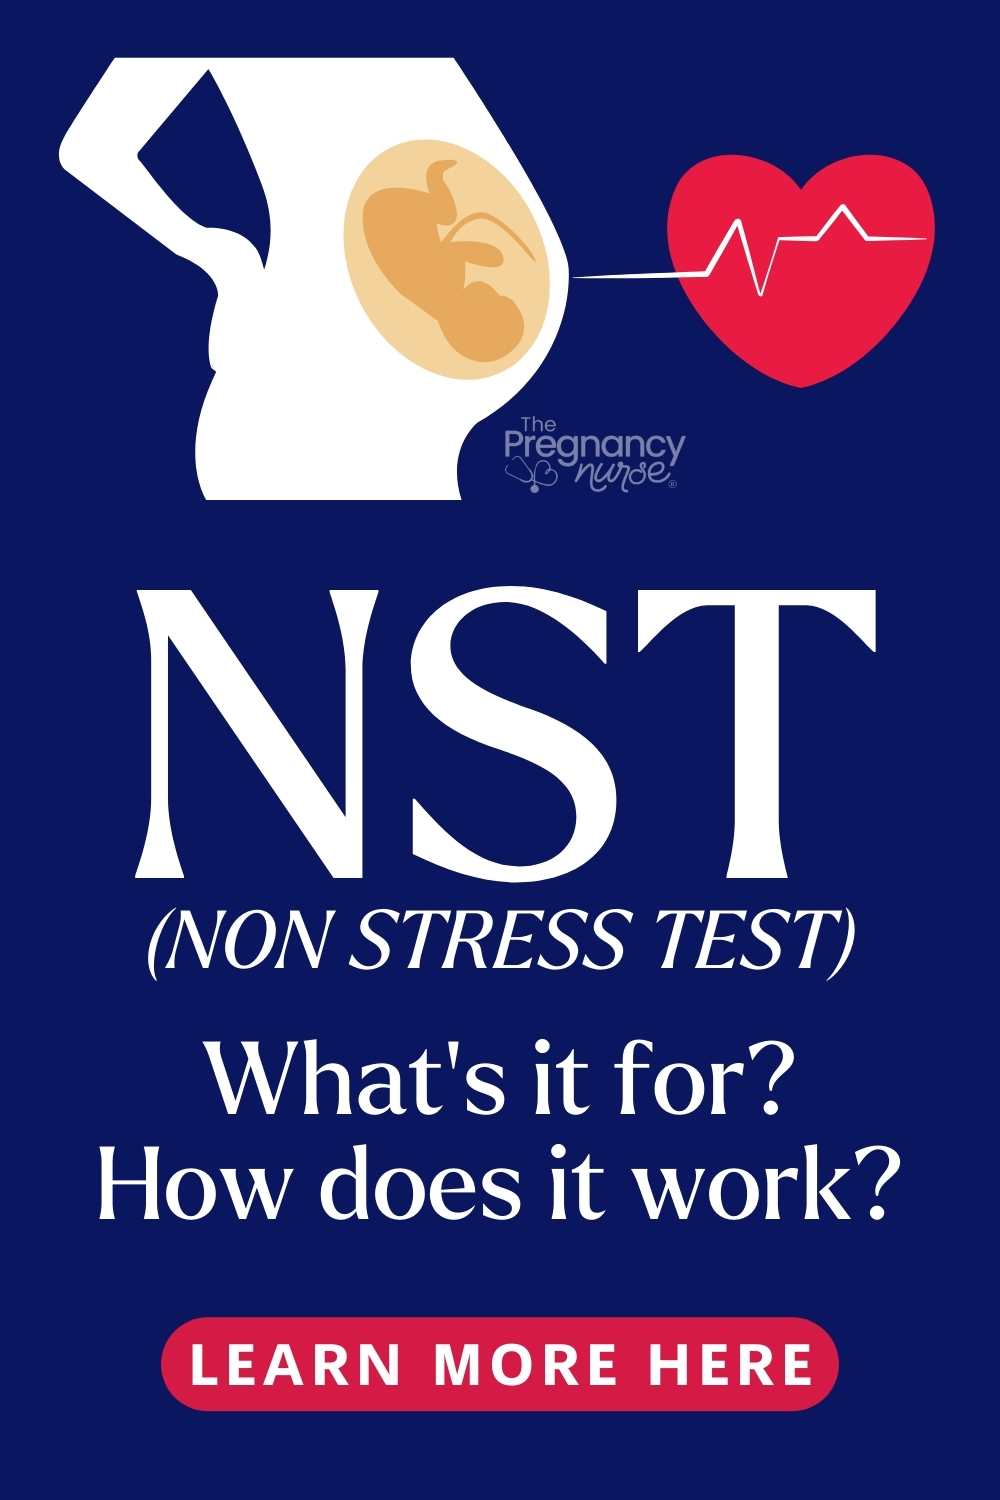 pregnant woman with heart EKG next to the baby // NST (non stress test) what's it for? how does it work? LEARN MORE HERE